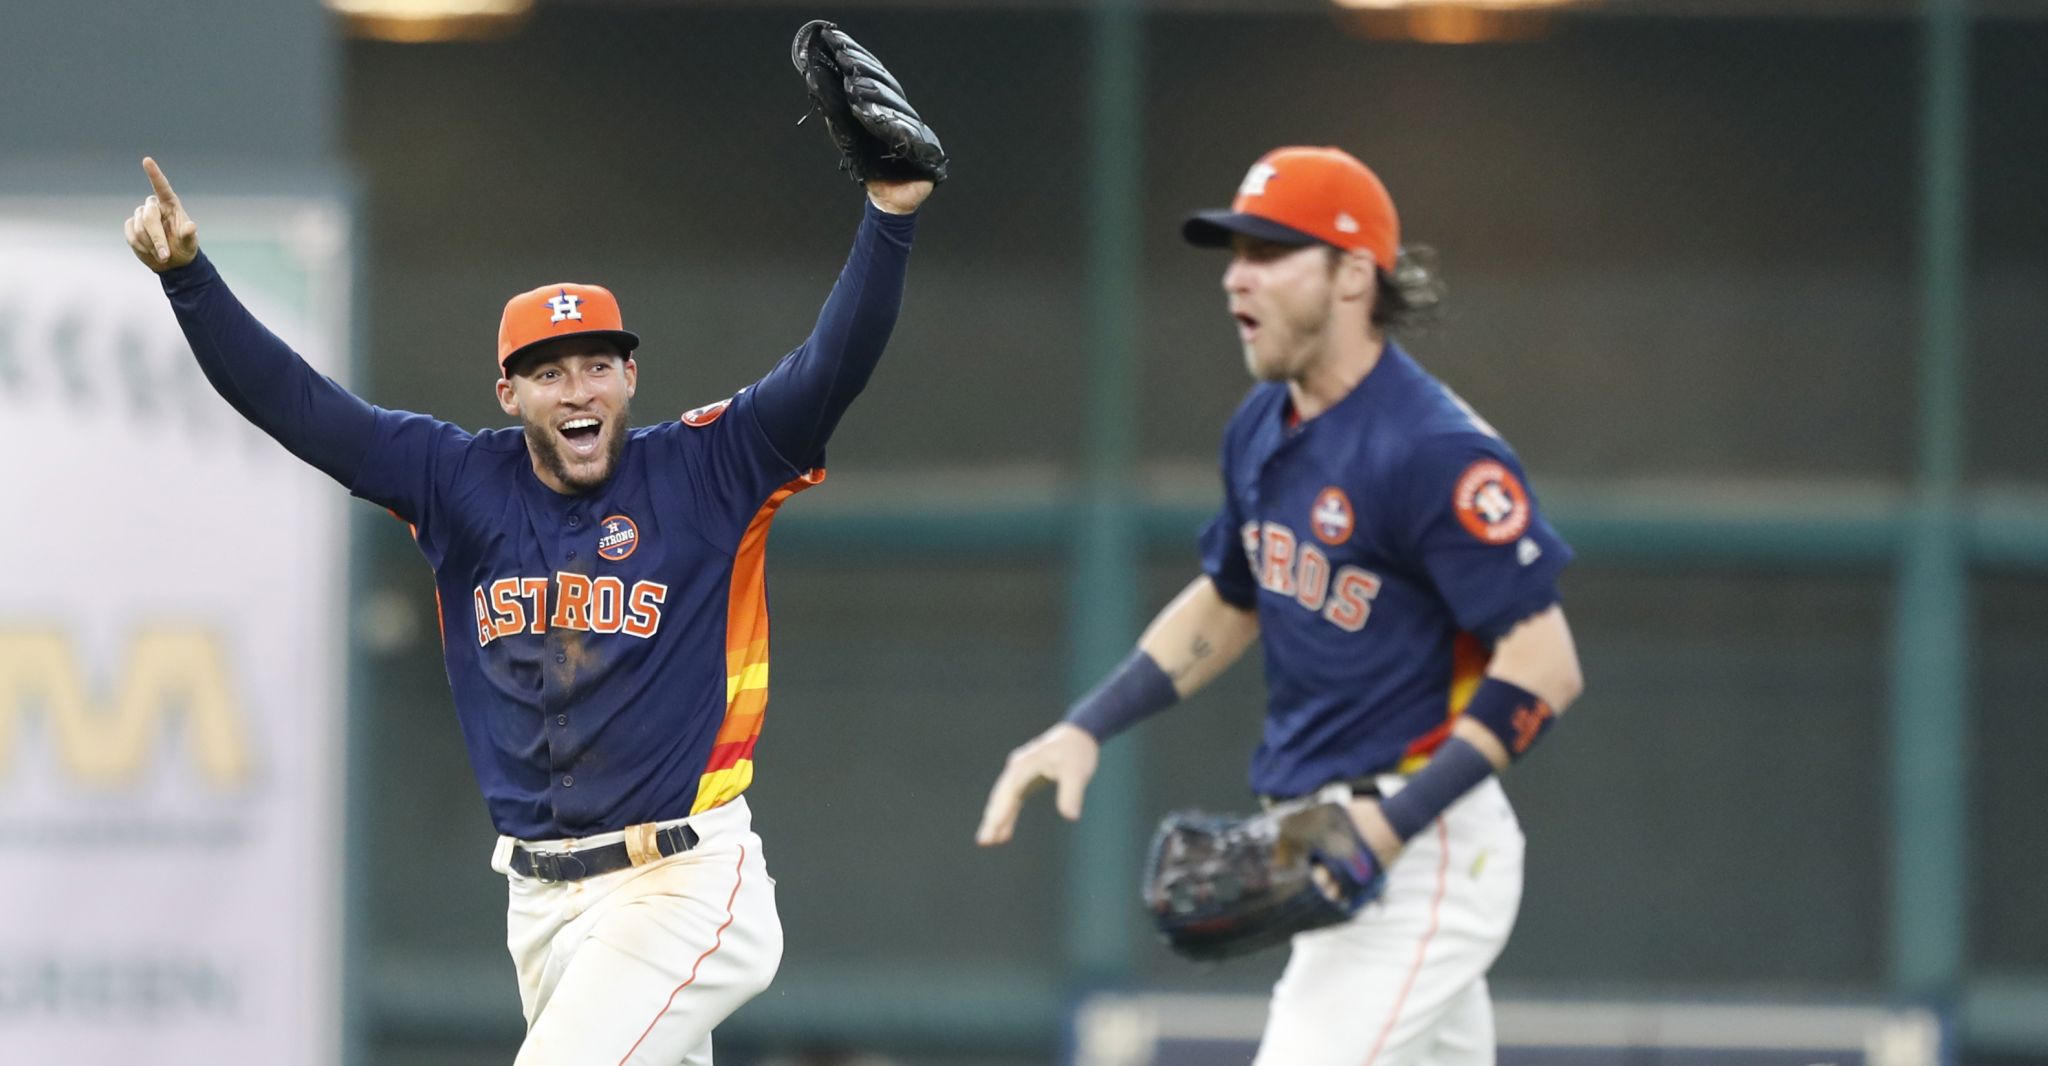 The West is won: Astros clinch first division title since 2001